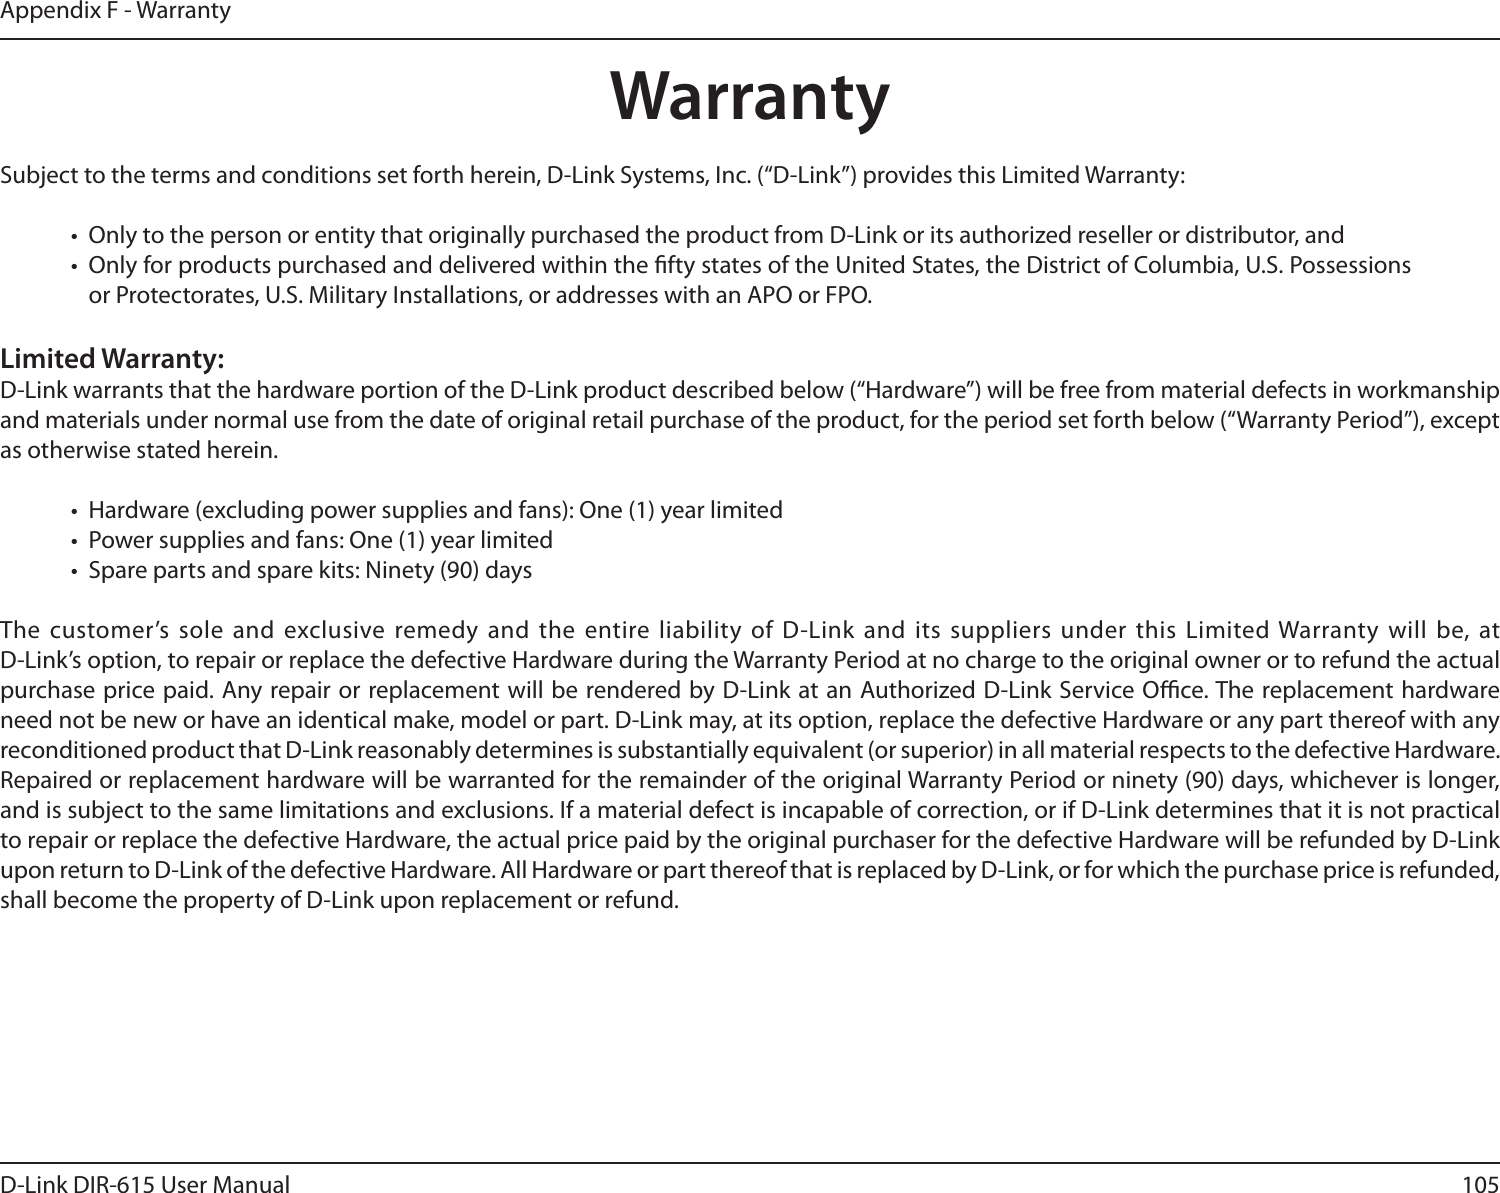 105D-Link DIR-615 User ManualAppendix F - WarrantyWarrantySubject to the terms and conditions set forth herein, D-Link Systems, Inc. (“D-Link”) provides this Limited Warranty:•  Only to the person or entity that originally purchased the product from D-Link or its authorized reseller or distributor, and•  Only for products purchased and delivered within the fty states of the United States, the District of Columbia, U.S. Possessions or Protectorates, U.S. Military Installations, or addresses with an APO or FPO.Limited Warranty:D-Link warrants that the hardware portion of the D-Link product described below (“Hardware”) will be free from material defects in workmanship and materials under normal use from the date of original retail purchase of the product, for the period set forth below (“Warranty Period”), except as otherwise stated herein.•  Hardware (excluding power supplies and fans): One (1) year limited•  Power supplies and fans: One (1) year limited•  Spare parts and spare kits: Ninety (90) daysThe customer’s sole and exclusive remedy and the entire liability of  D-Link and  its suppliers under  this Limited Warranty will be, at  D-Link’s option, to repair or replace the defective Hardware during the Warranty Period at no charge to the original owner or to refund the actual purchase price paid. Any repair or replacement will be rendered by D-Link at an Authorized D-Link Service Oce. The replacement hardware need not be new or have an identical make, model or part. D-Link may, at its option, replace the defective Hardware or any part thereof with any reconditioned product that D-Link reasonably determines is substantially equivalent (or superior) in all material respects to the defective Hardware. Repaired or replacement hardware will be warranted for the remainder of the original Warranty Period or ninety (90) days, whichever is longer, and is subject to the same limitations and exclusions. If a material defect is incapable of correction, or if D-Link determines that it is not practical to repair or replace the defective Hardware, the actual price paid by the original purchaser for the defective Hardware will be refunded by D-Link upon return to D-Link of the defective Hardware. All Hardware or part thereof that is replaced by D-Link, or for which the purchase price is refunded, shall become the property of D-Link upon replacement or refund.